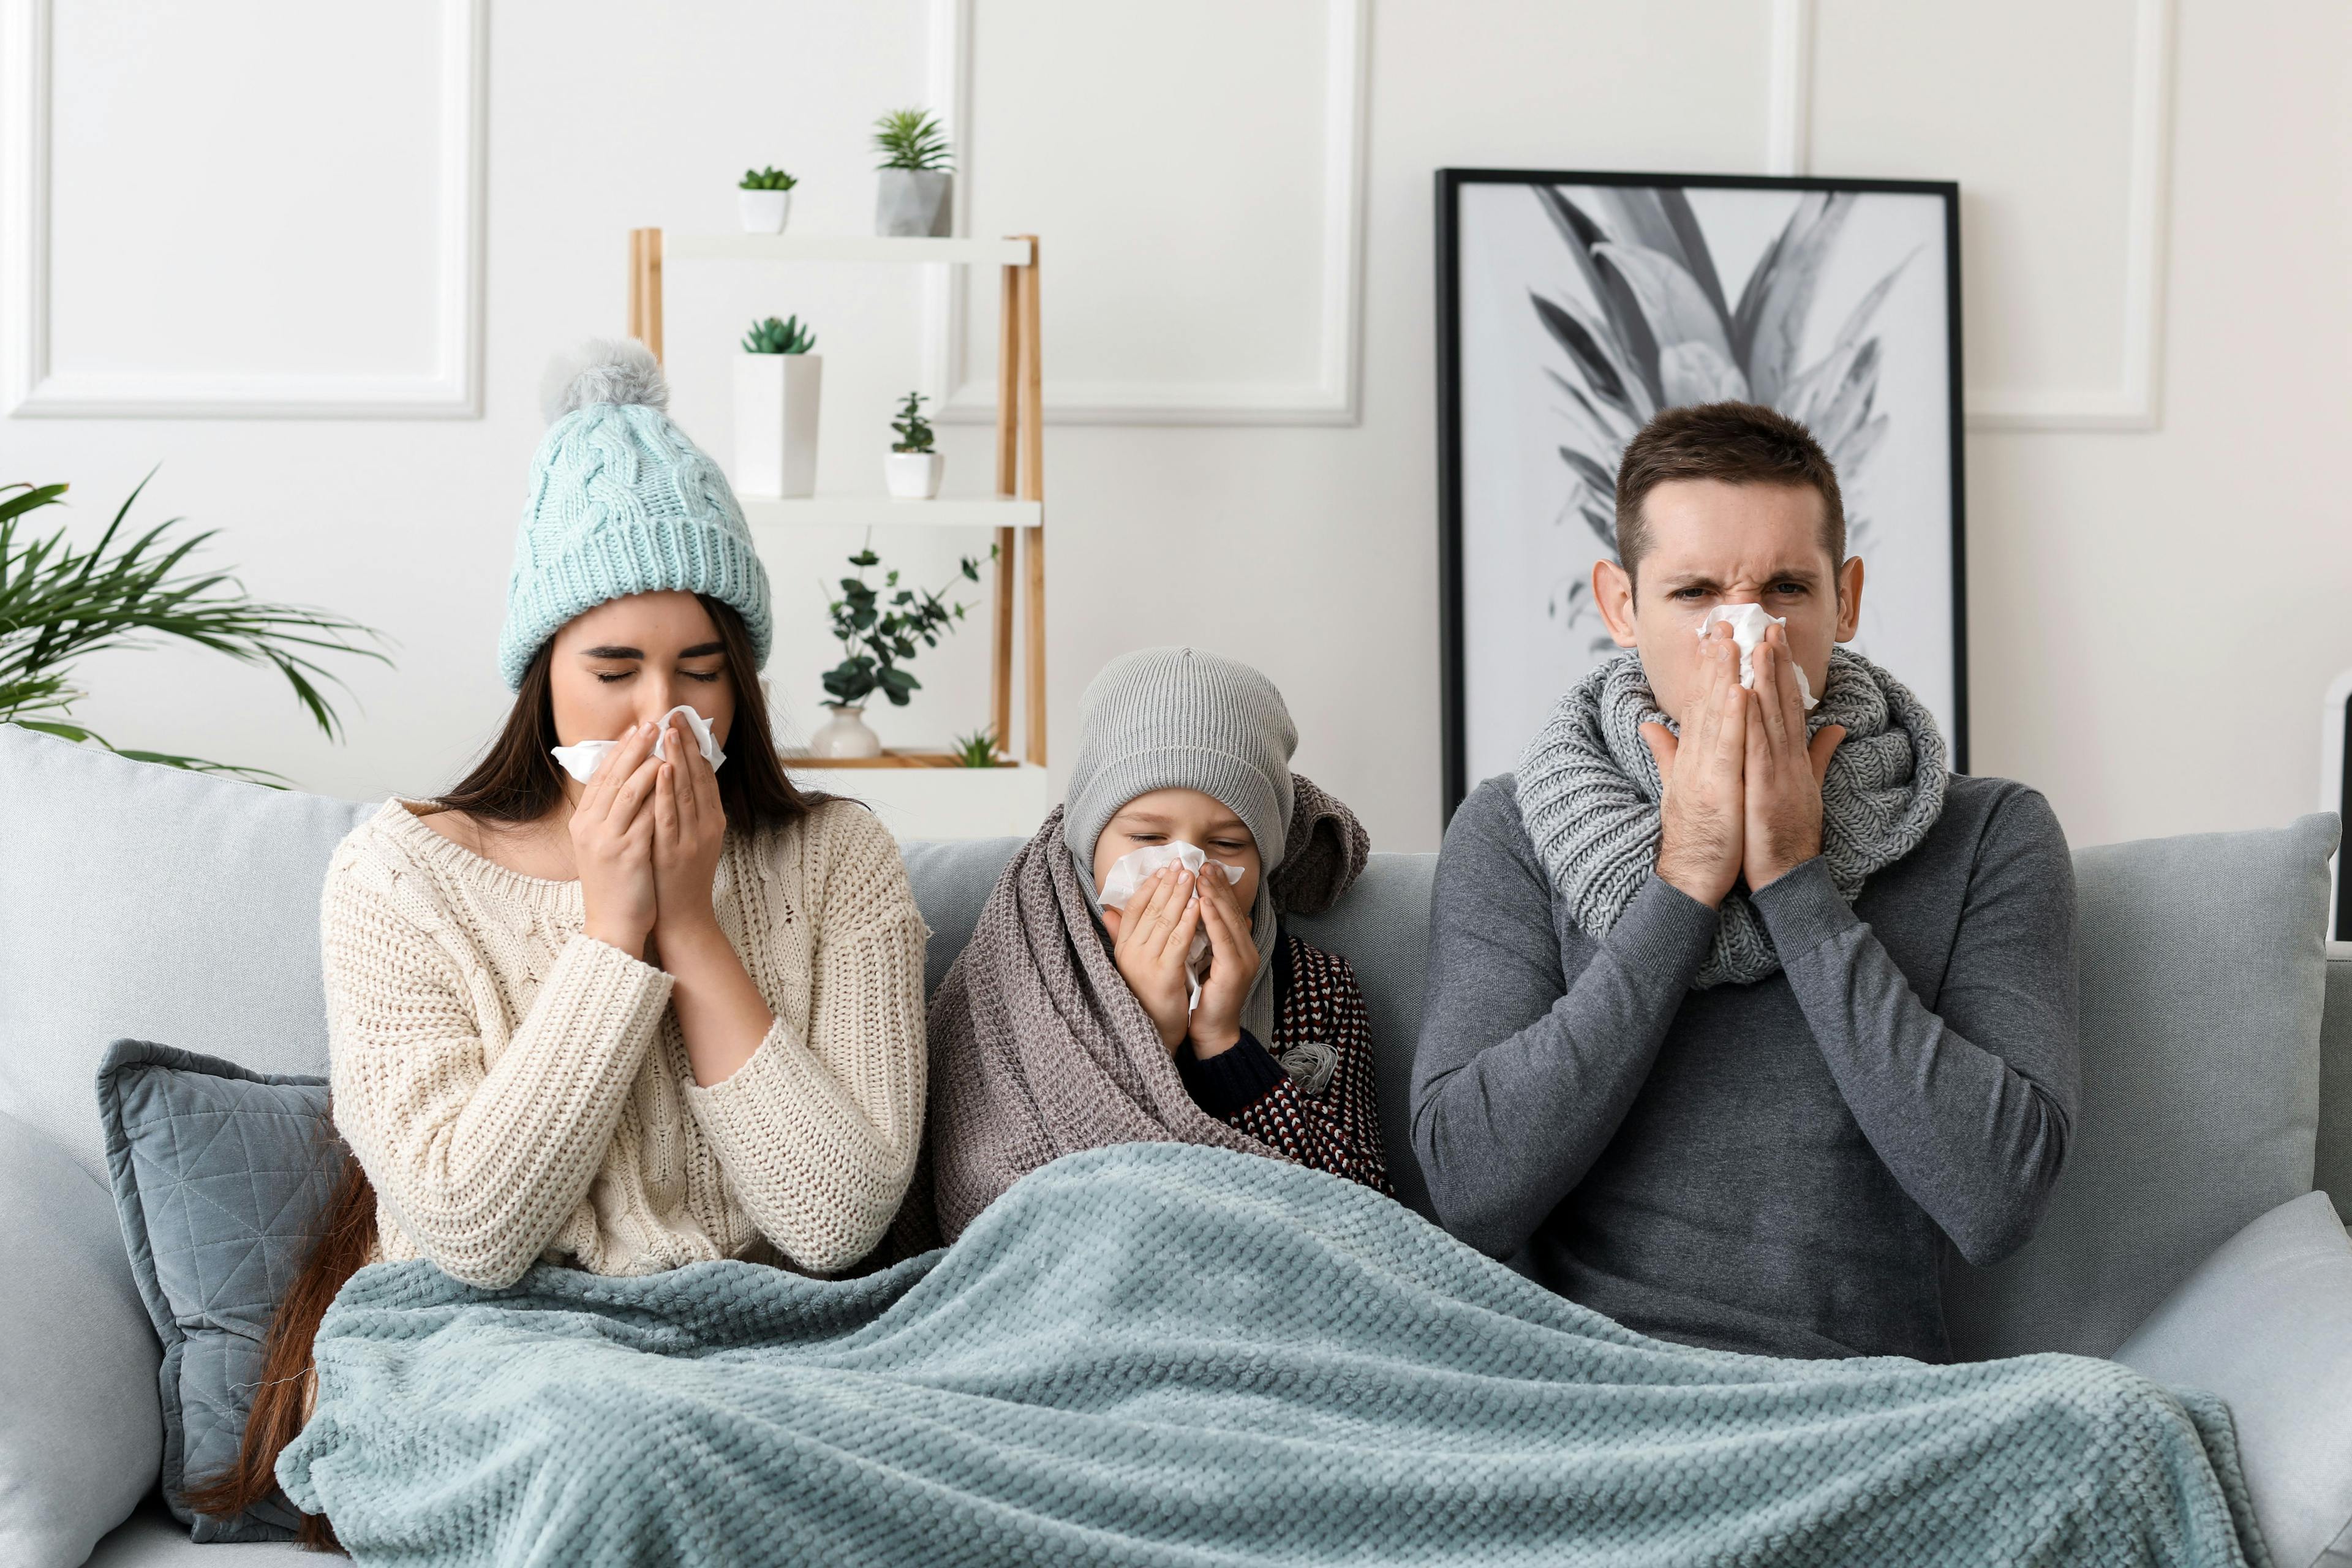 OTC Product Roundup: Cough, Cold, and Flu